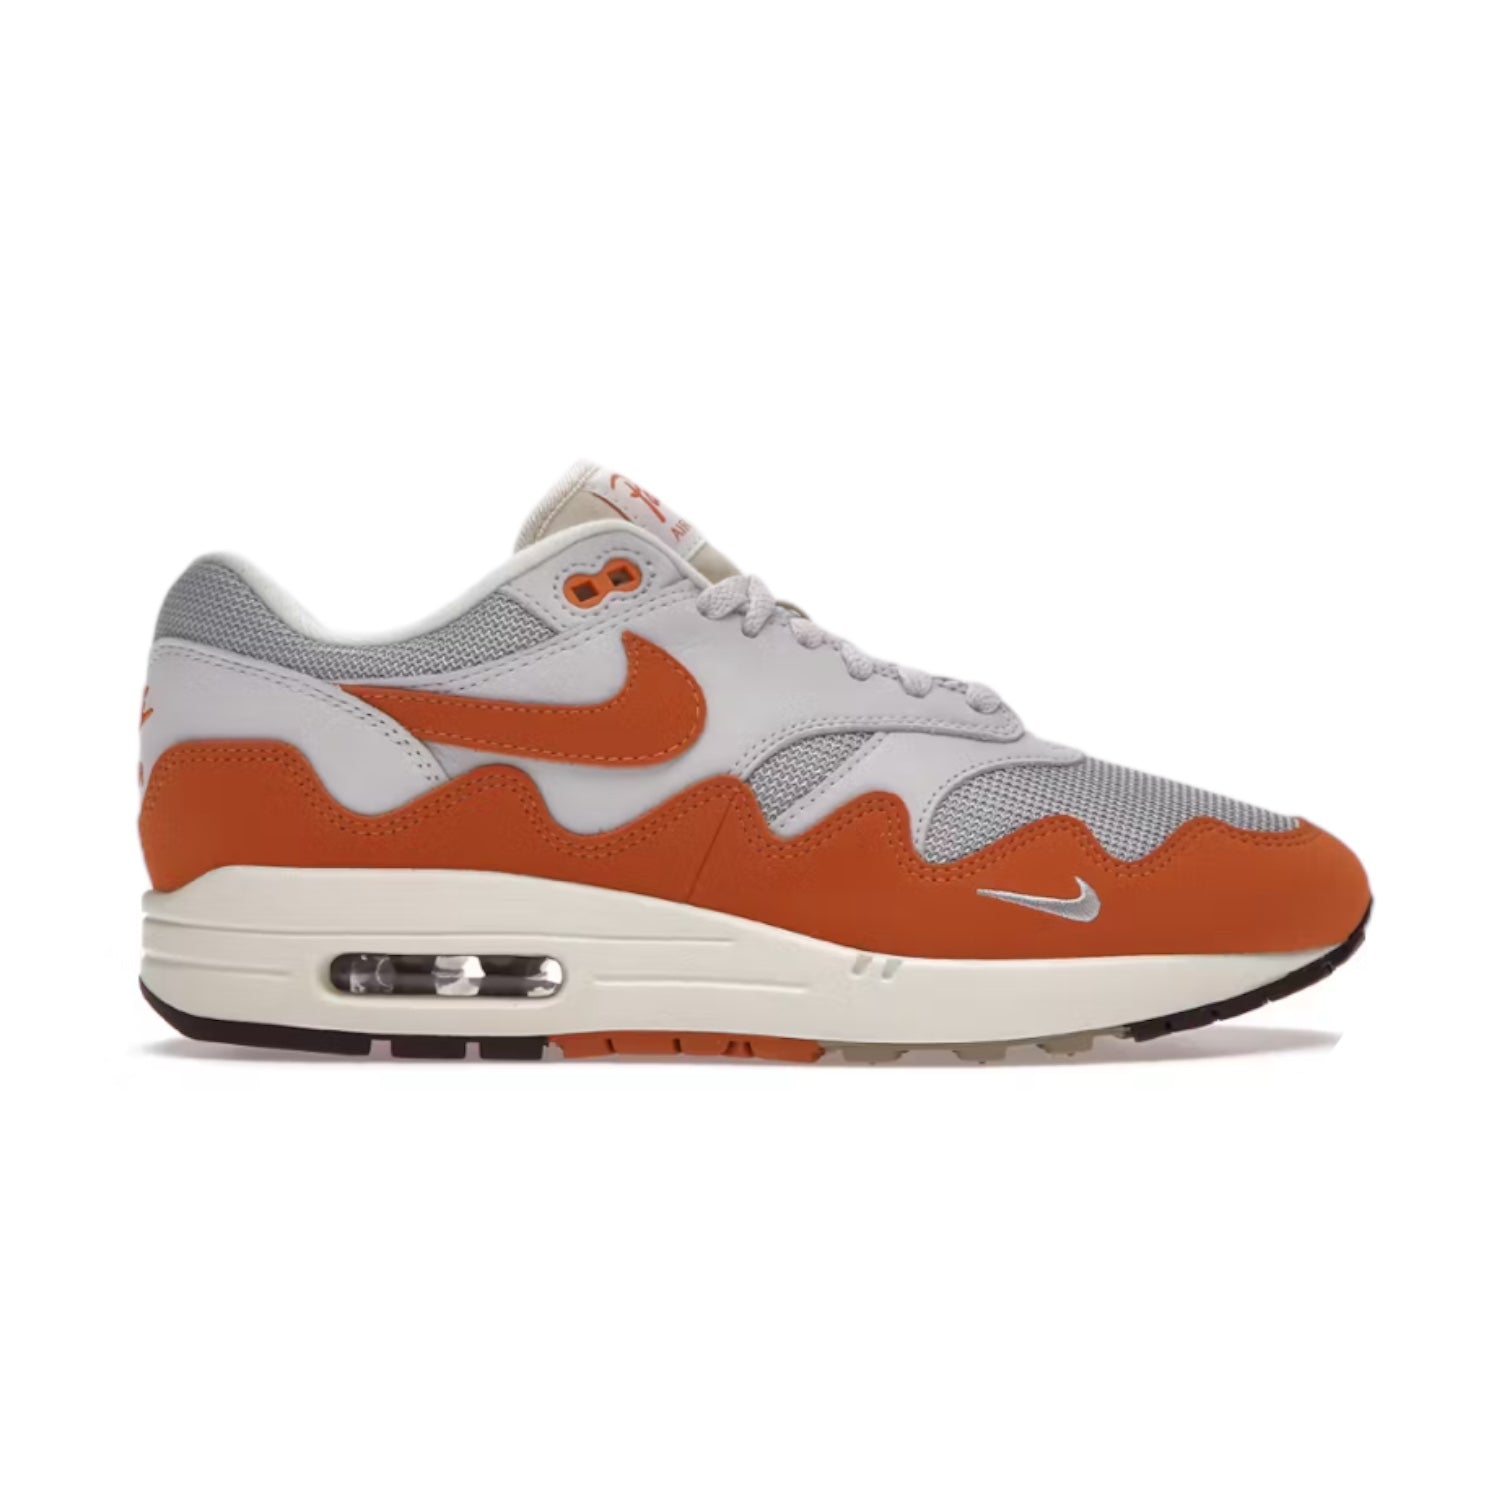 Nike Airmax One Patta Waves Monarch (Used)